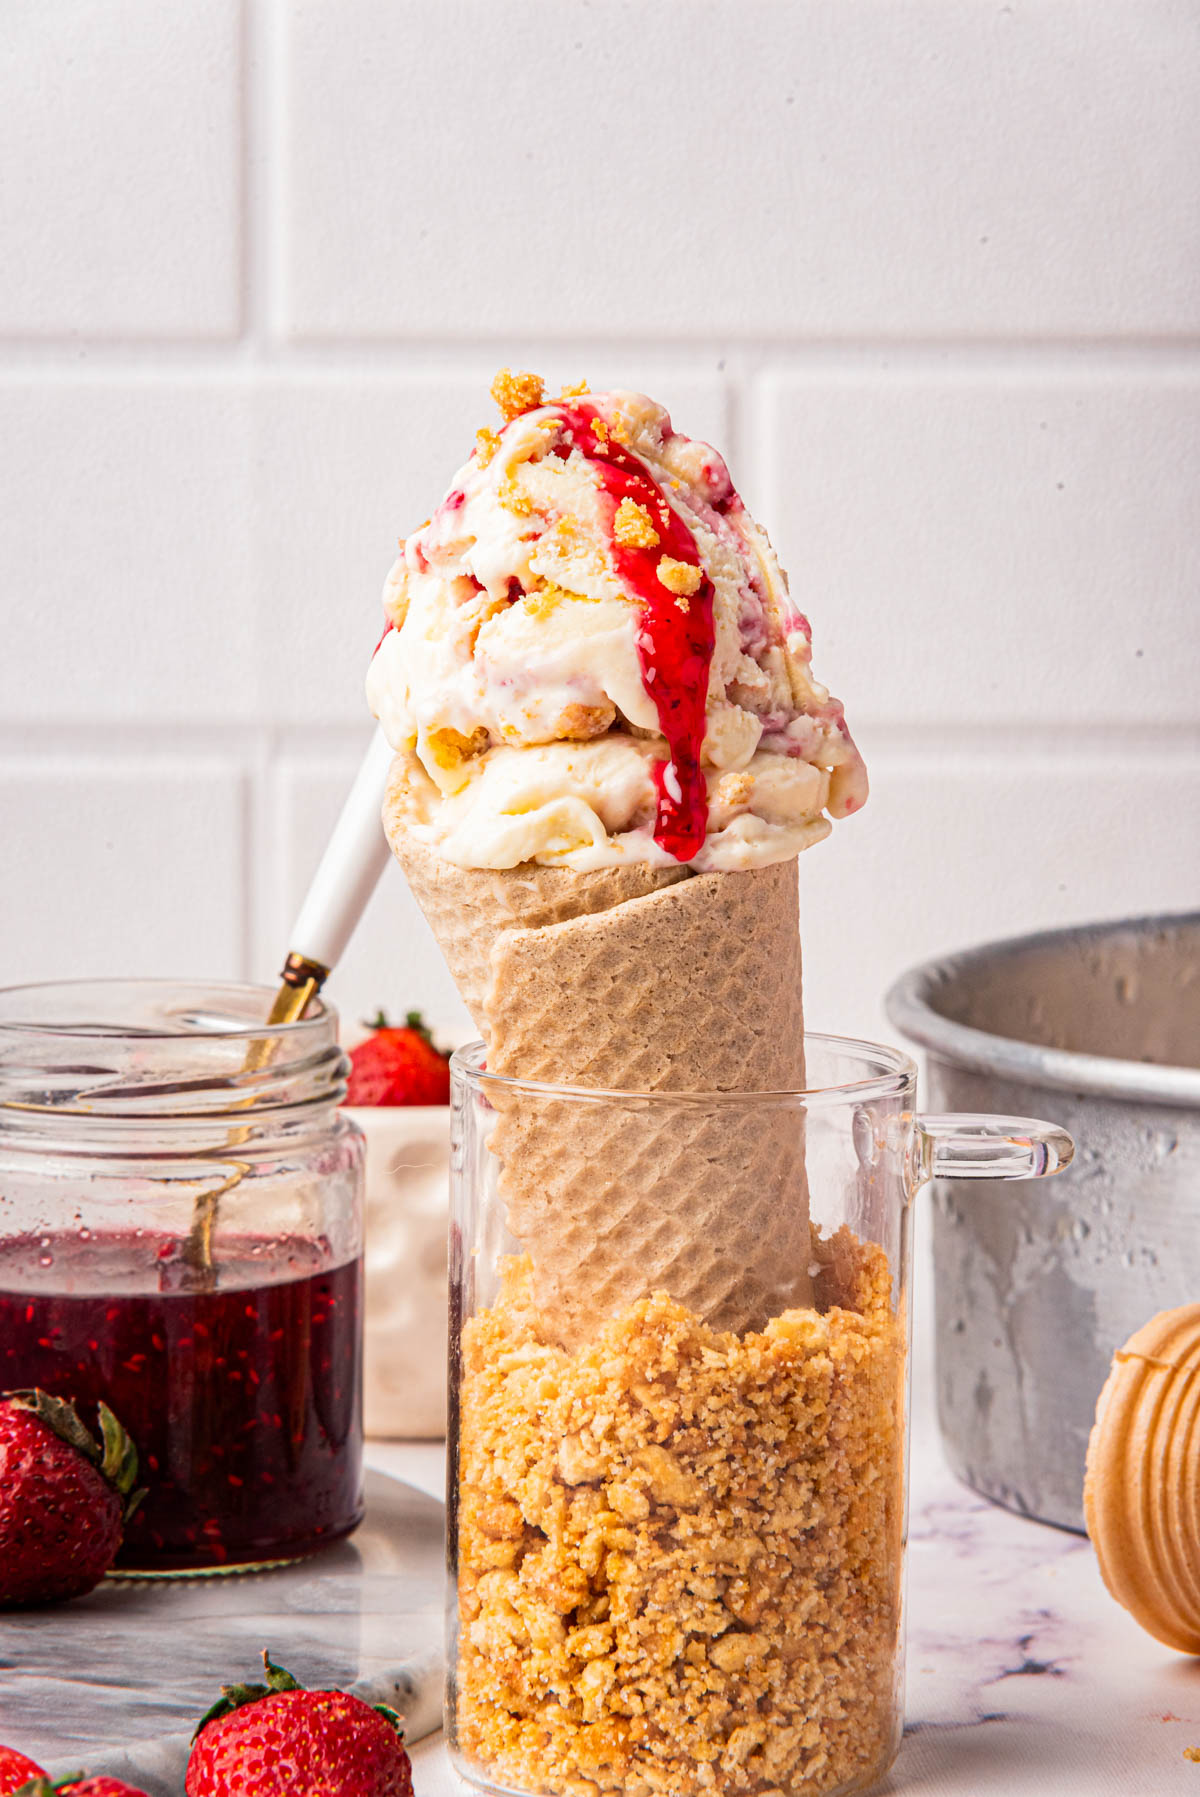 Close-up of strawberry ice cream served in a sugar cone with jam and graham cracker crumbs, with a background of strawberries and a striped napkin.